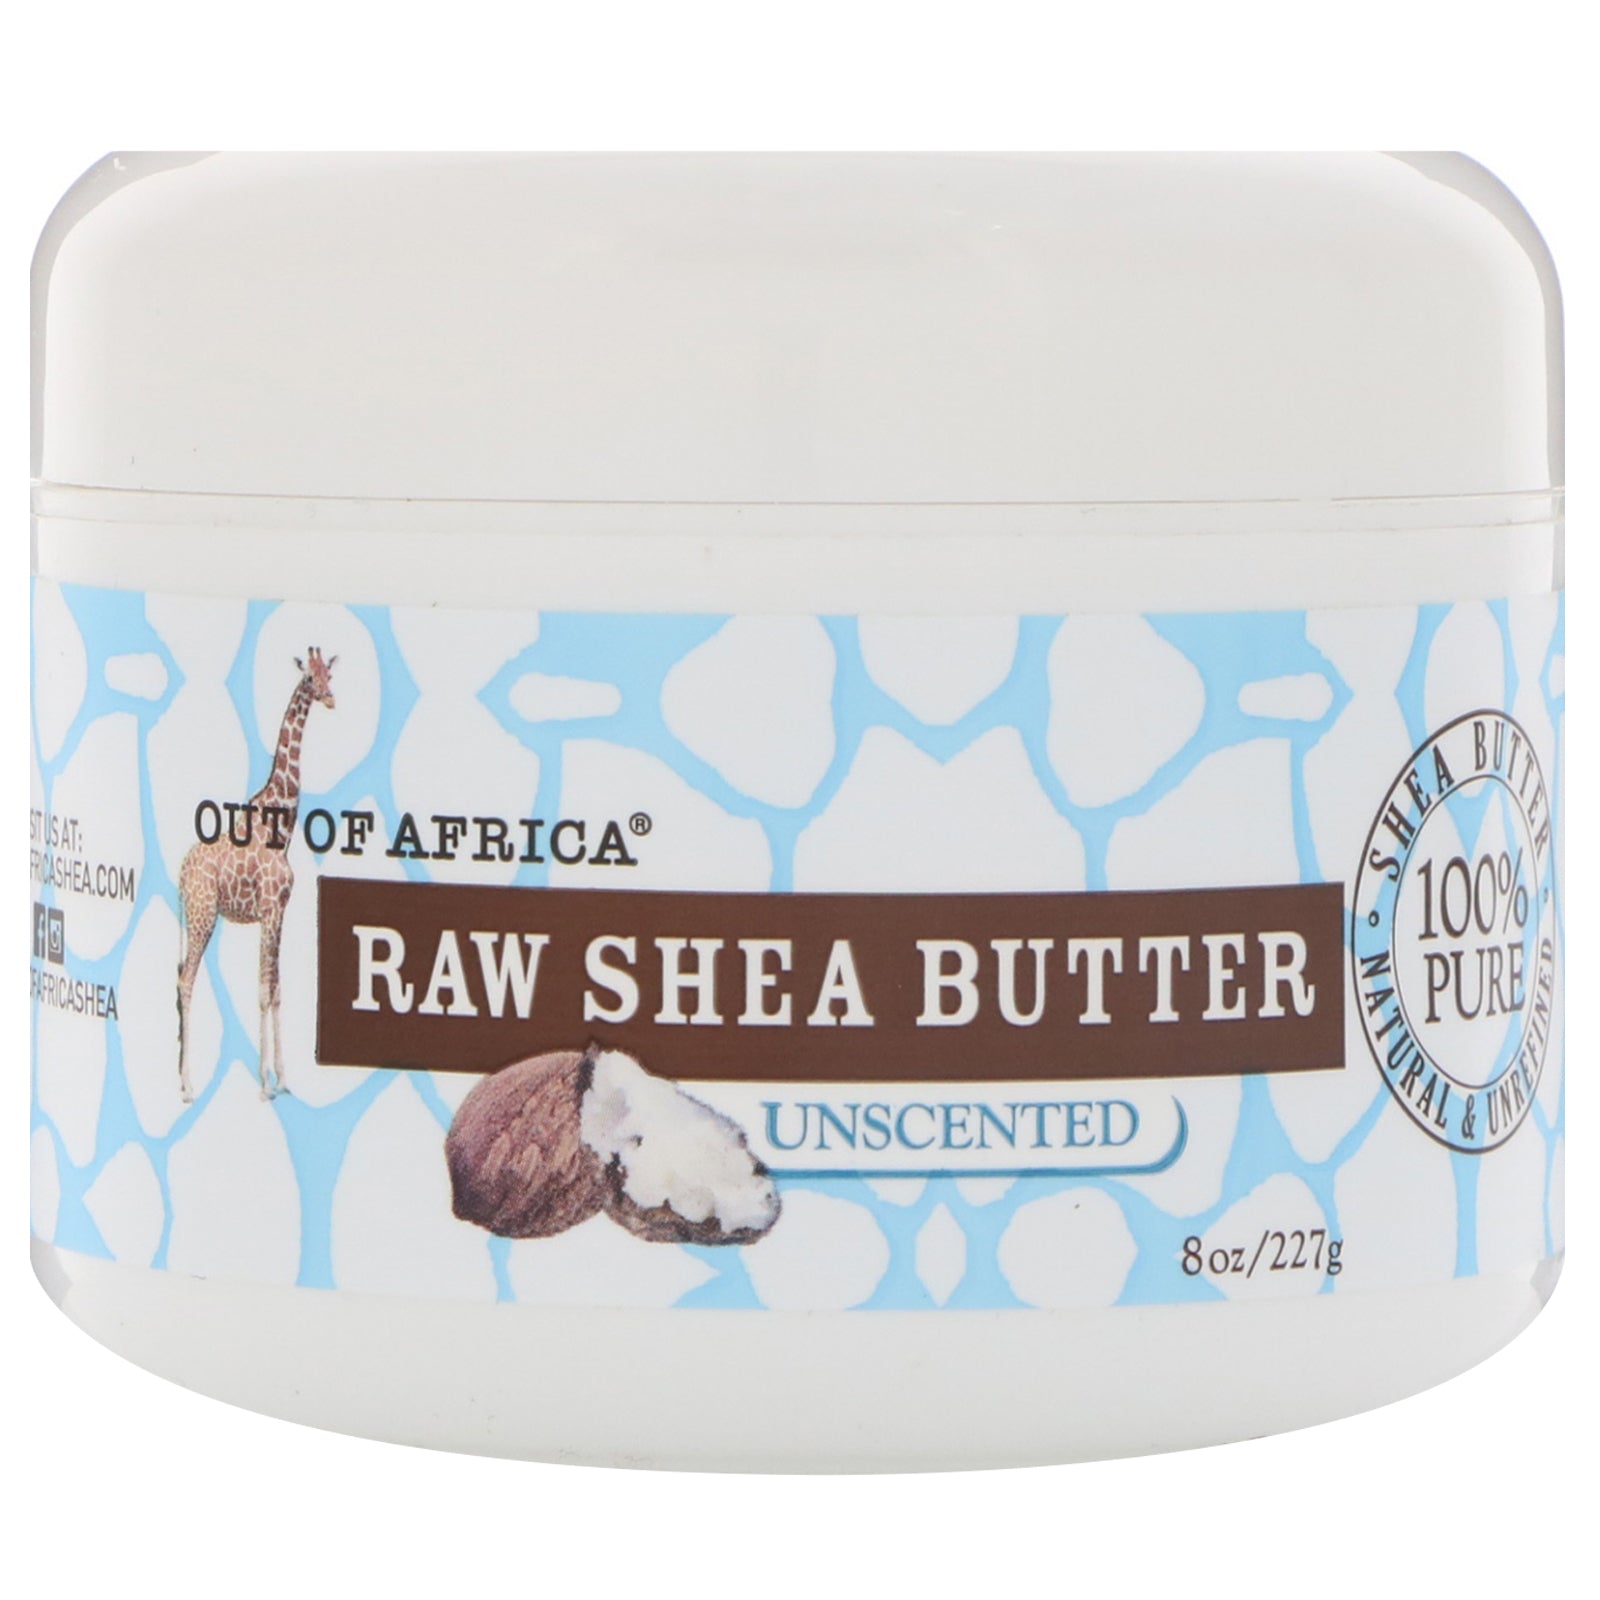 Out of Africa, Raw Shea Butter, Unscented, 8 oz (227 g)